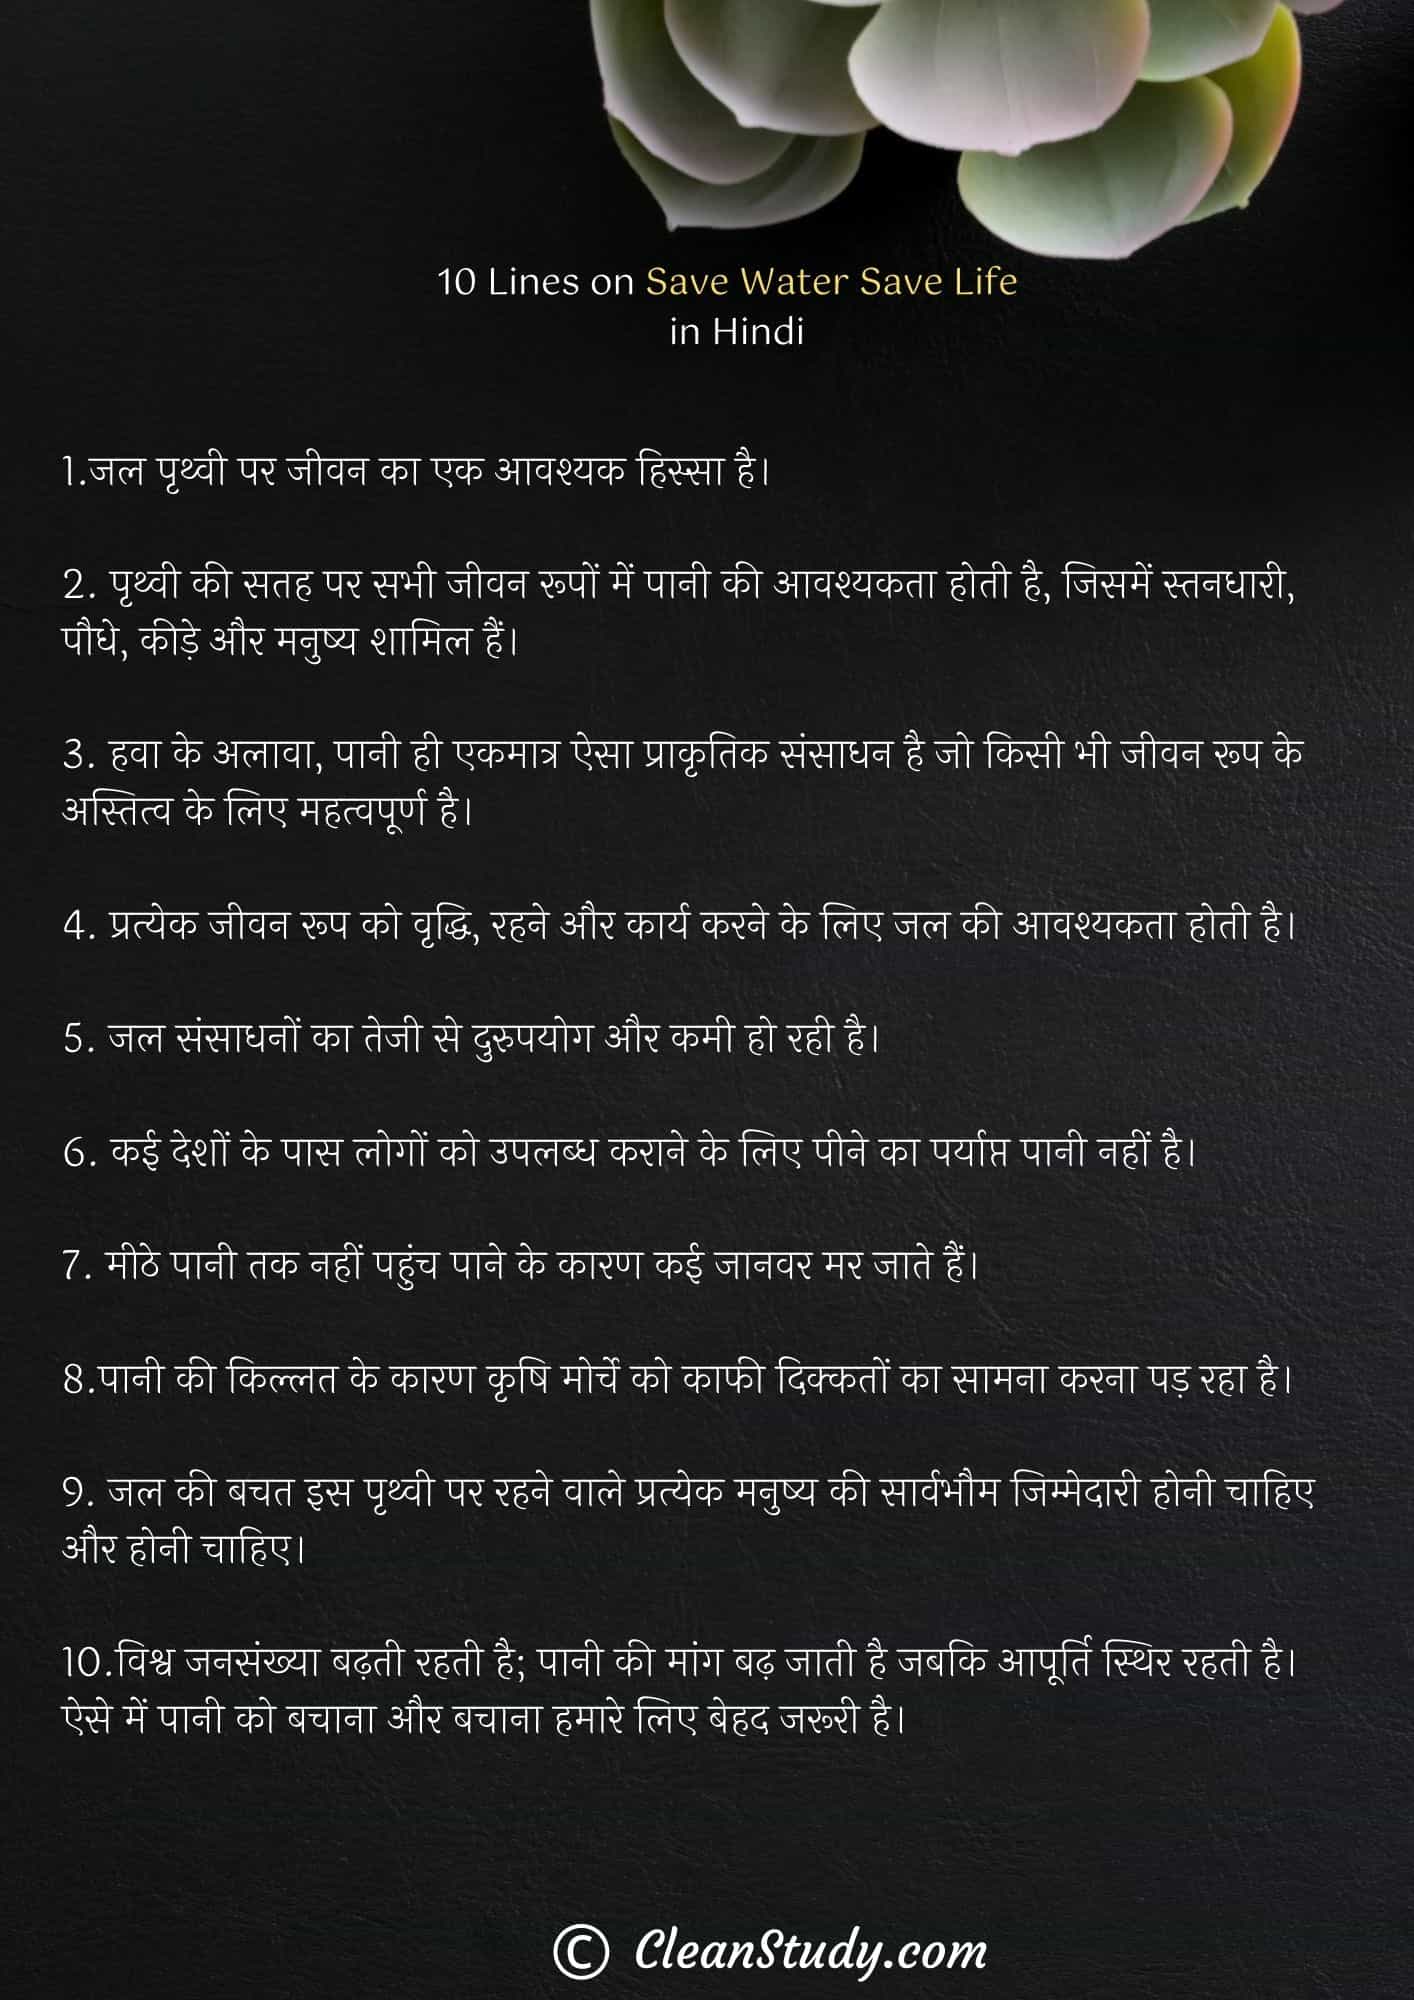 10 Lines on Save Water Save Life in Hindi